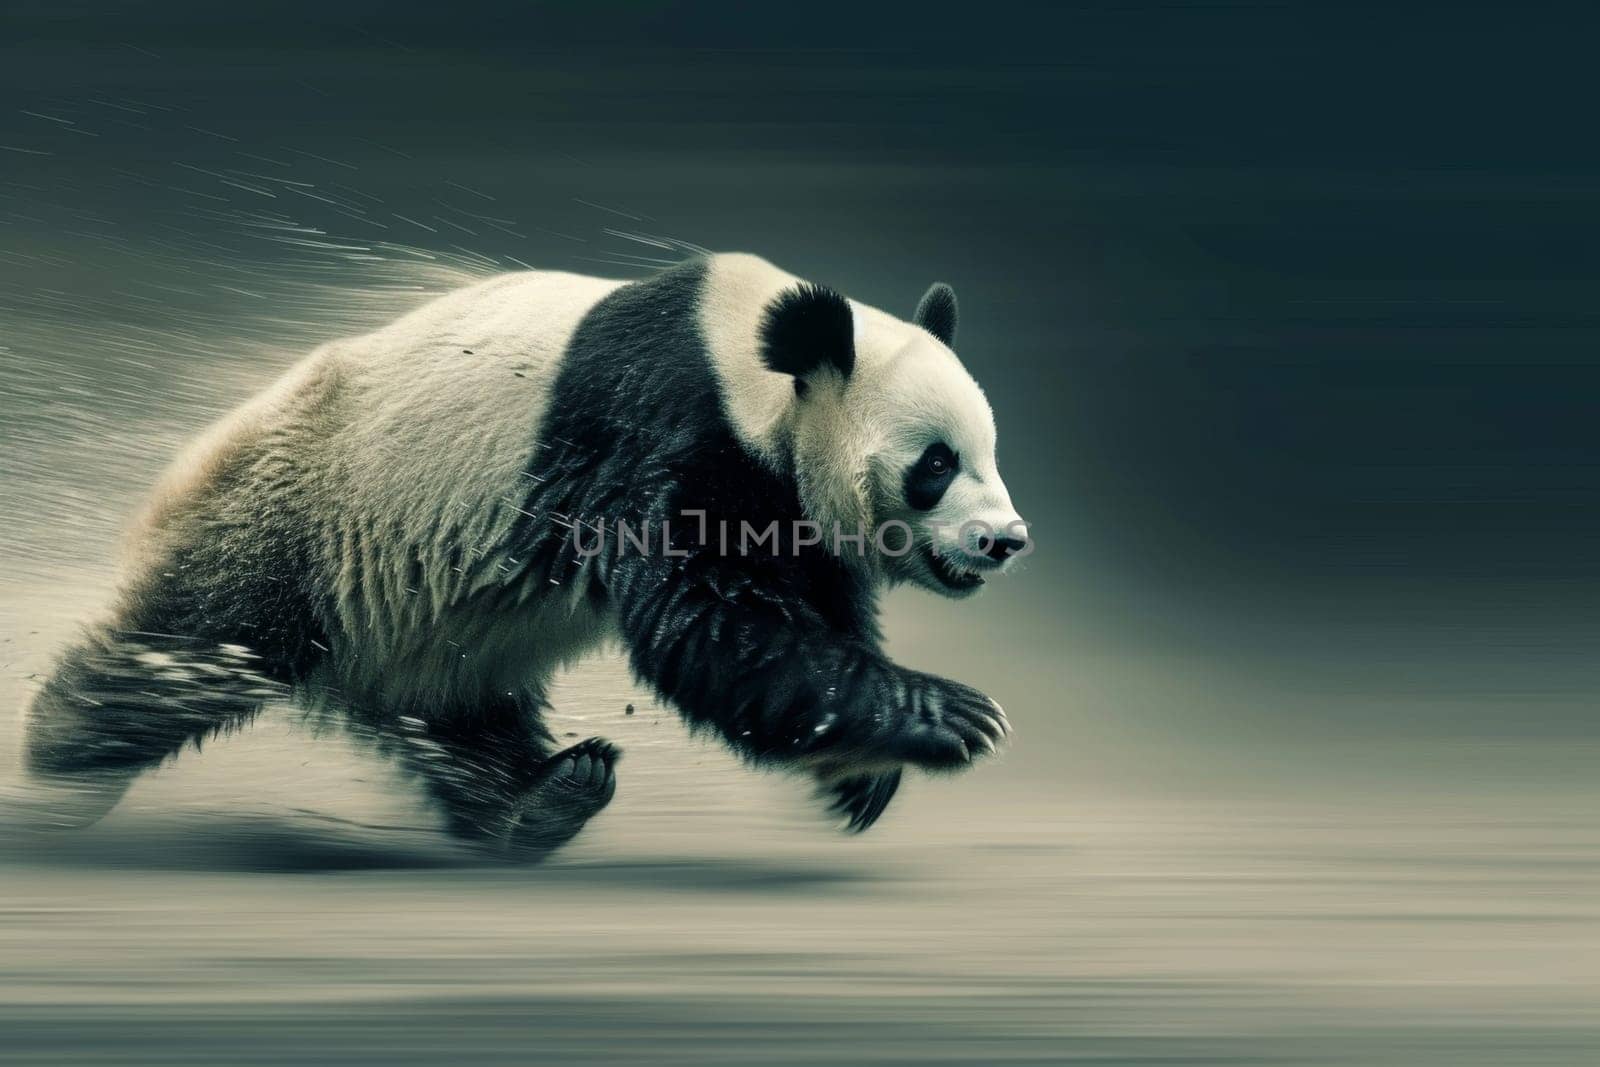 The giant panda is running fast. 3d illustration.